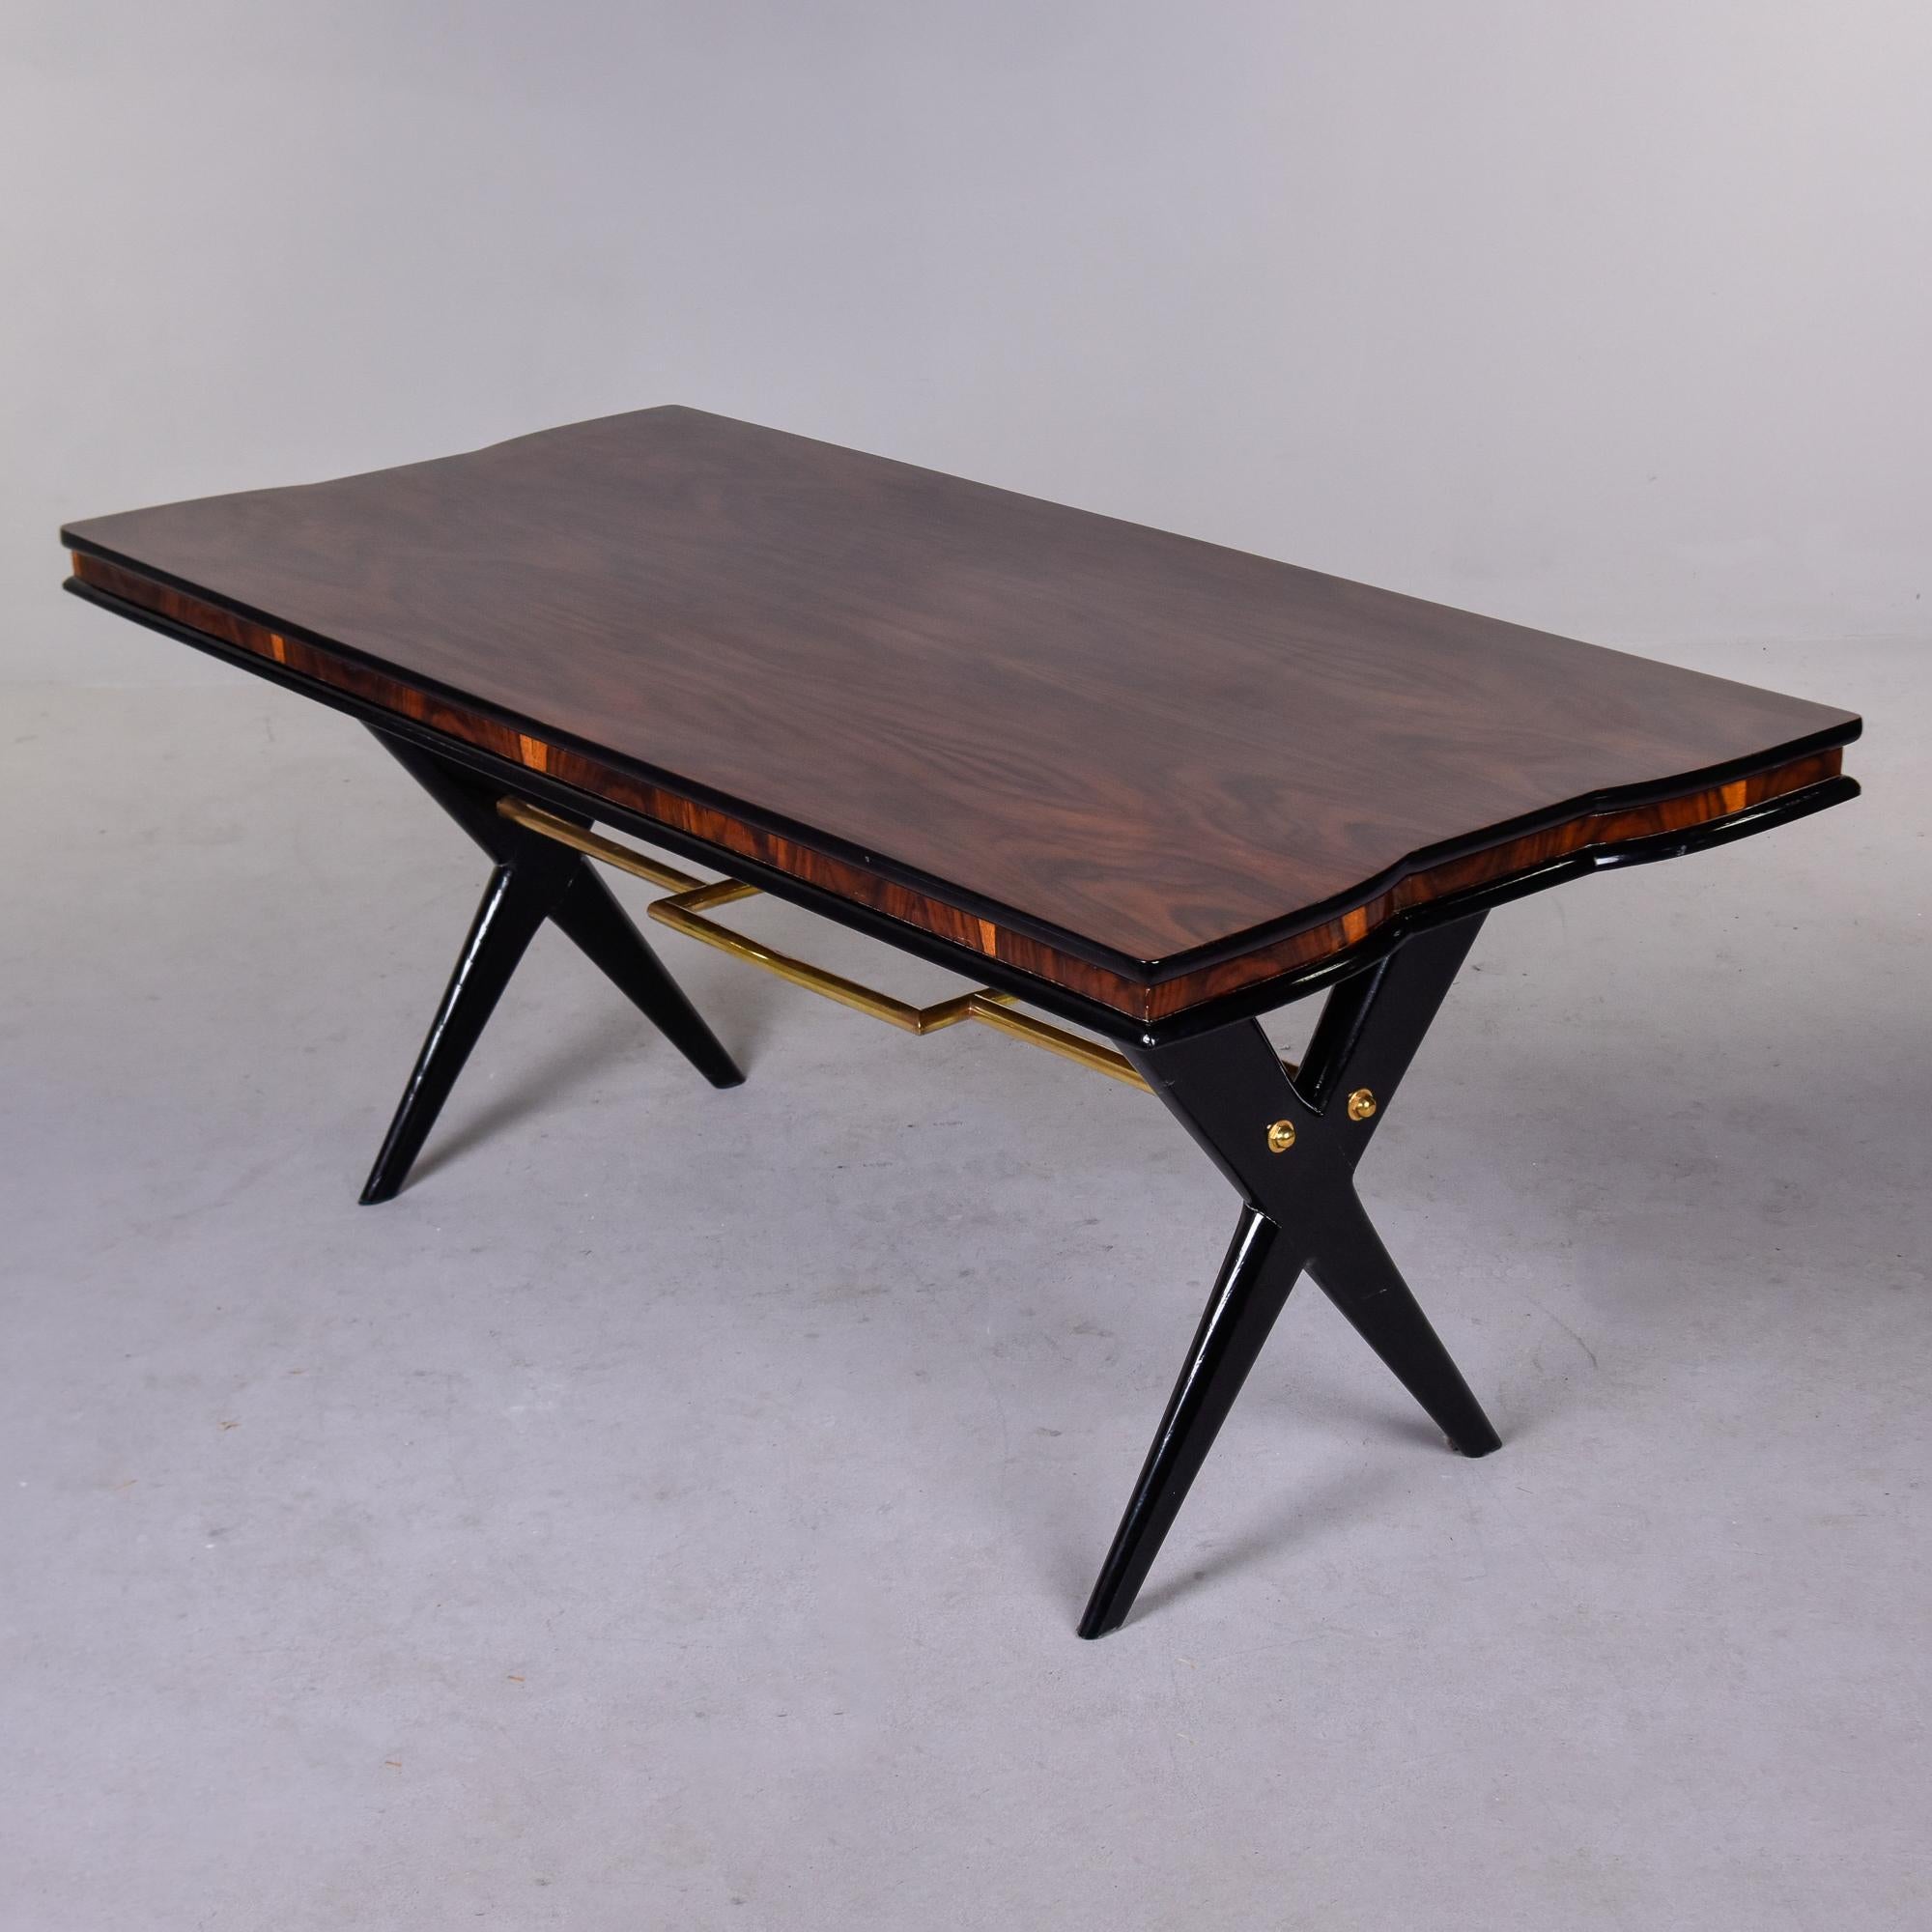 Found in Italy, this circa 1950 Art Deco dining table has black X-form legs, a decorative brass stretcher with rectangular detail and a rosewood top with subtle curves at the end. This piece was professionally refinished by the Italian dealer we